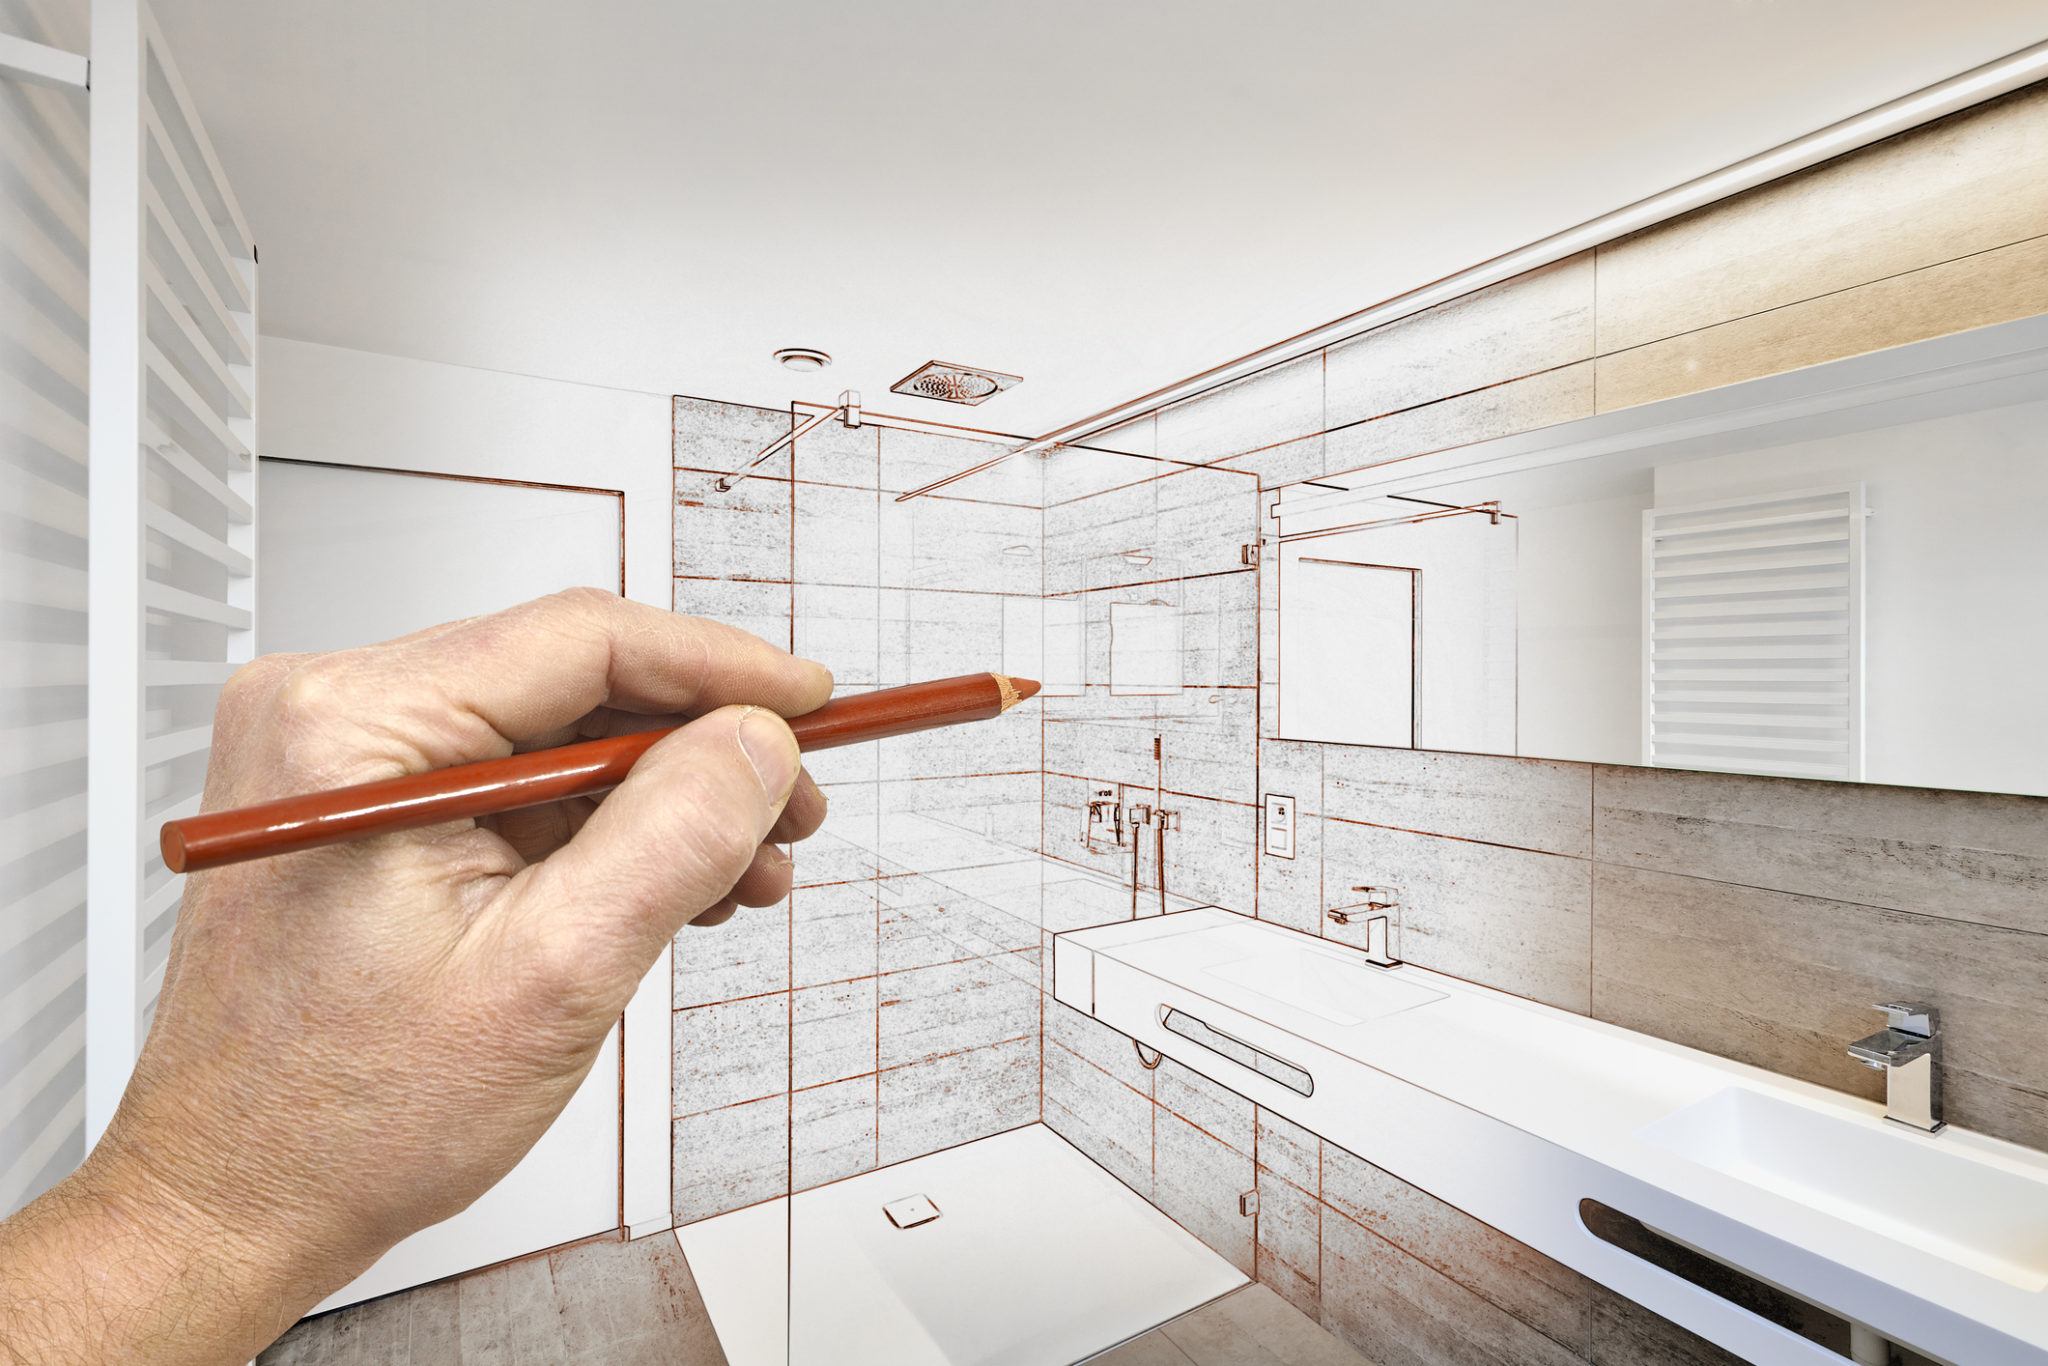 Drawing renovation of a luxury bathroom estate home shower